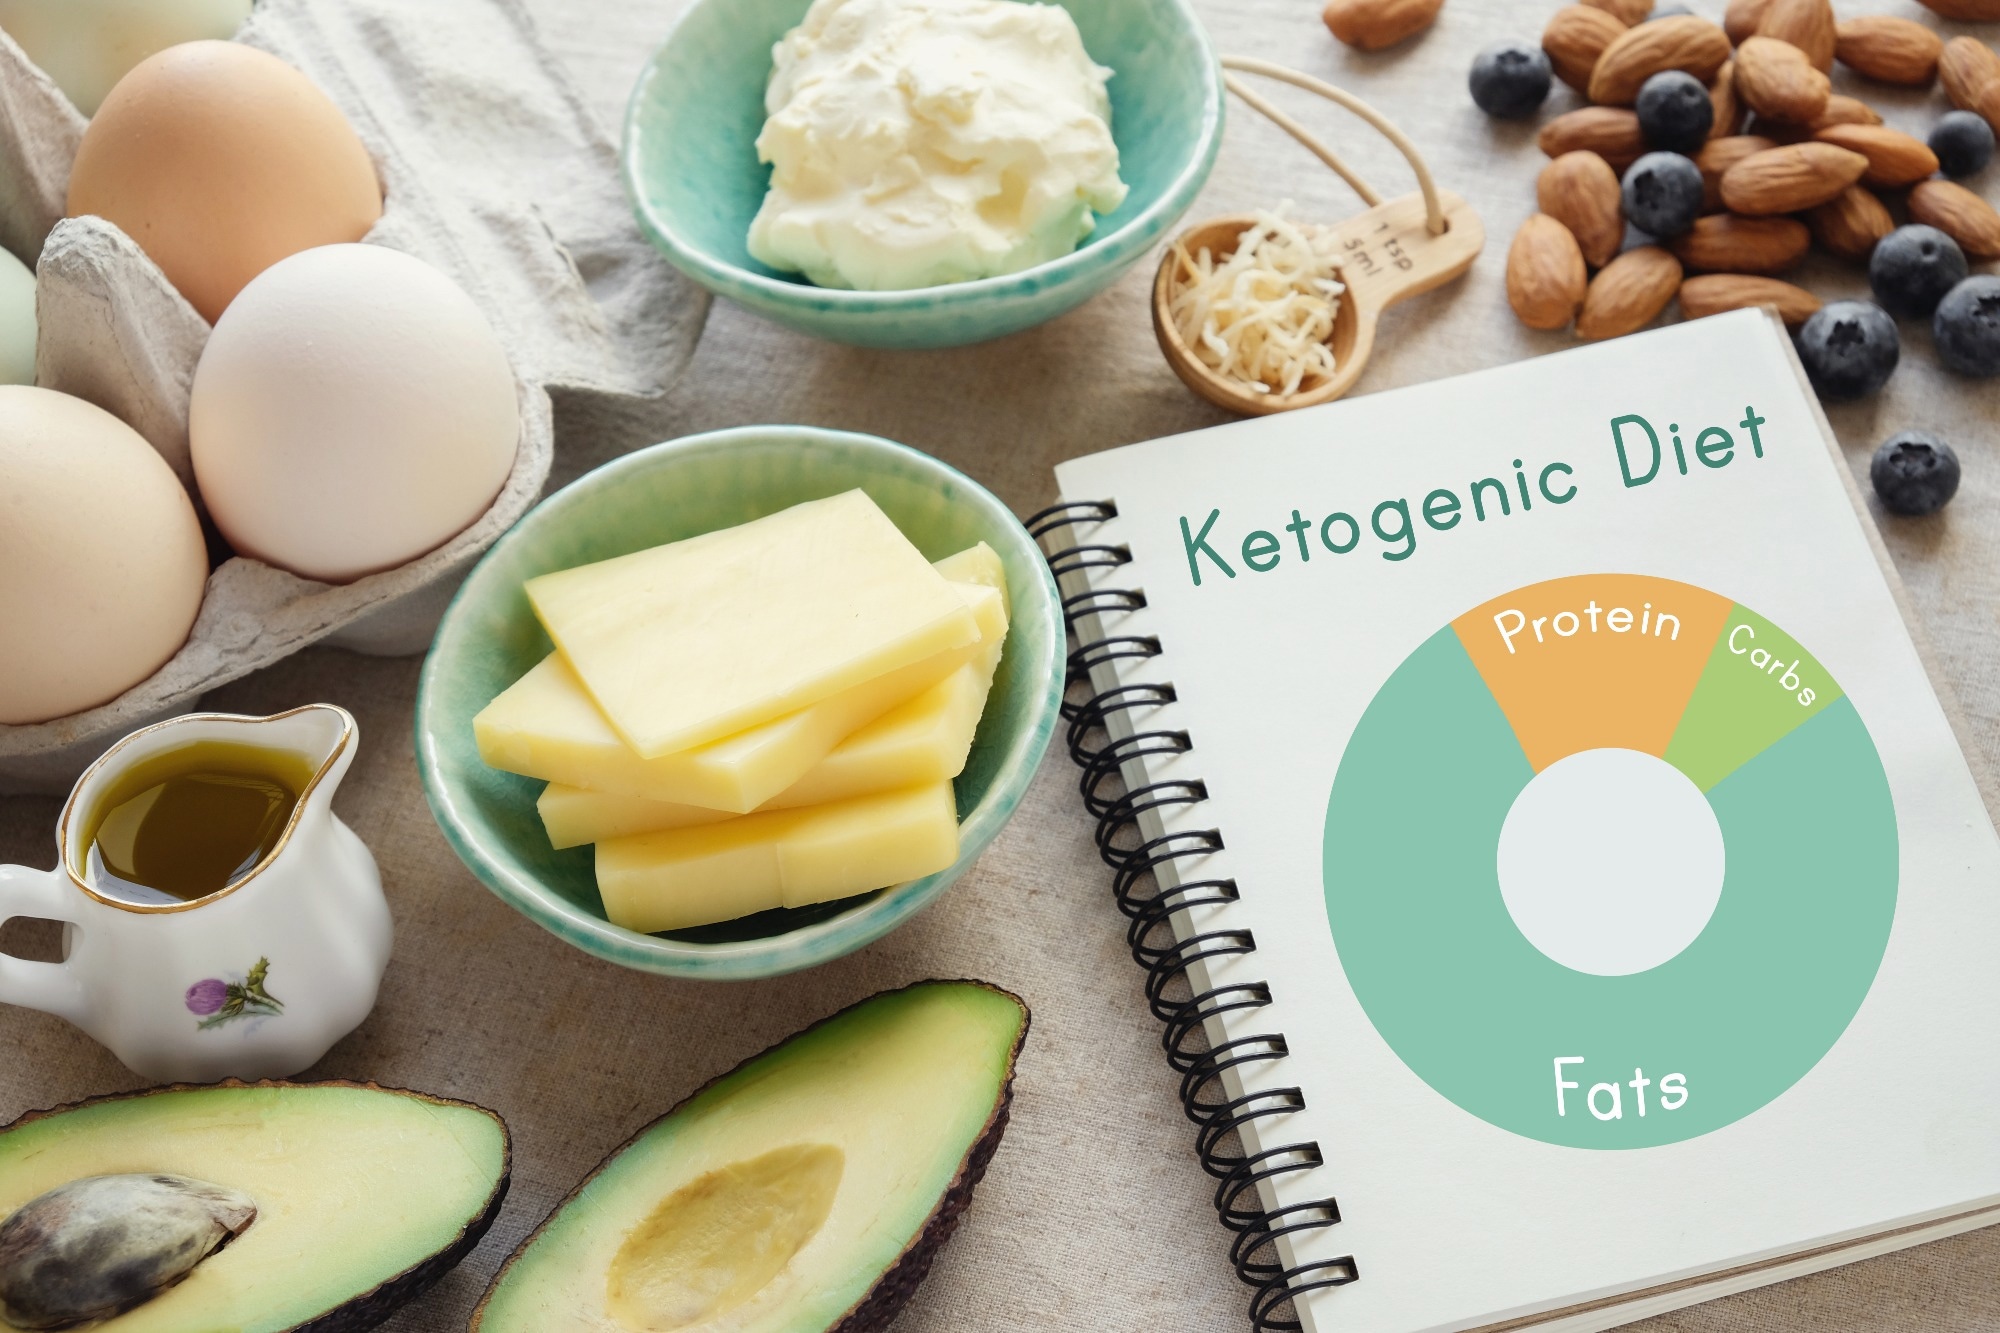 Study: Dramatic elevation of LDL cholesterol from ketogenic-dieting: A Case Series. Image Credit: SewCreamStudio/Shutterstock.com